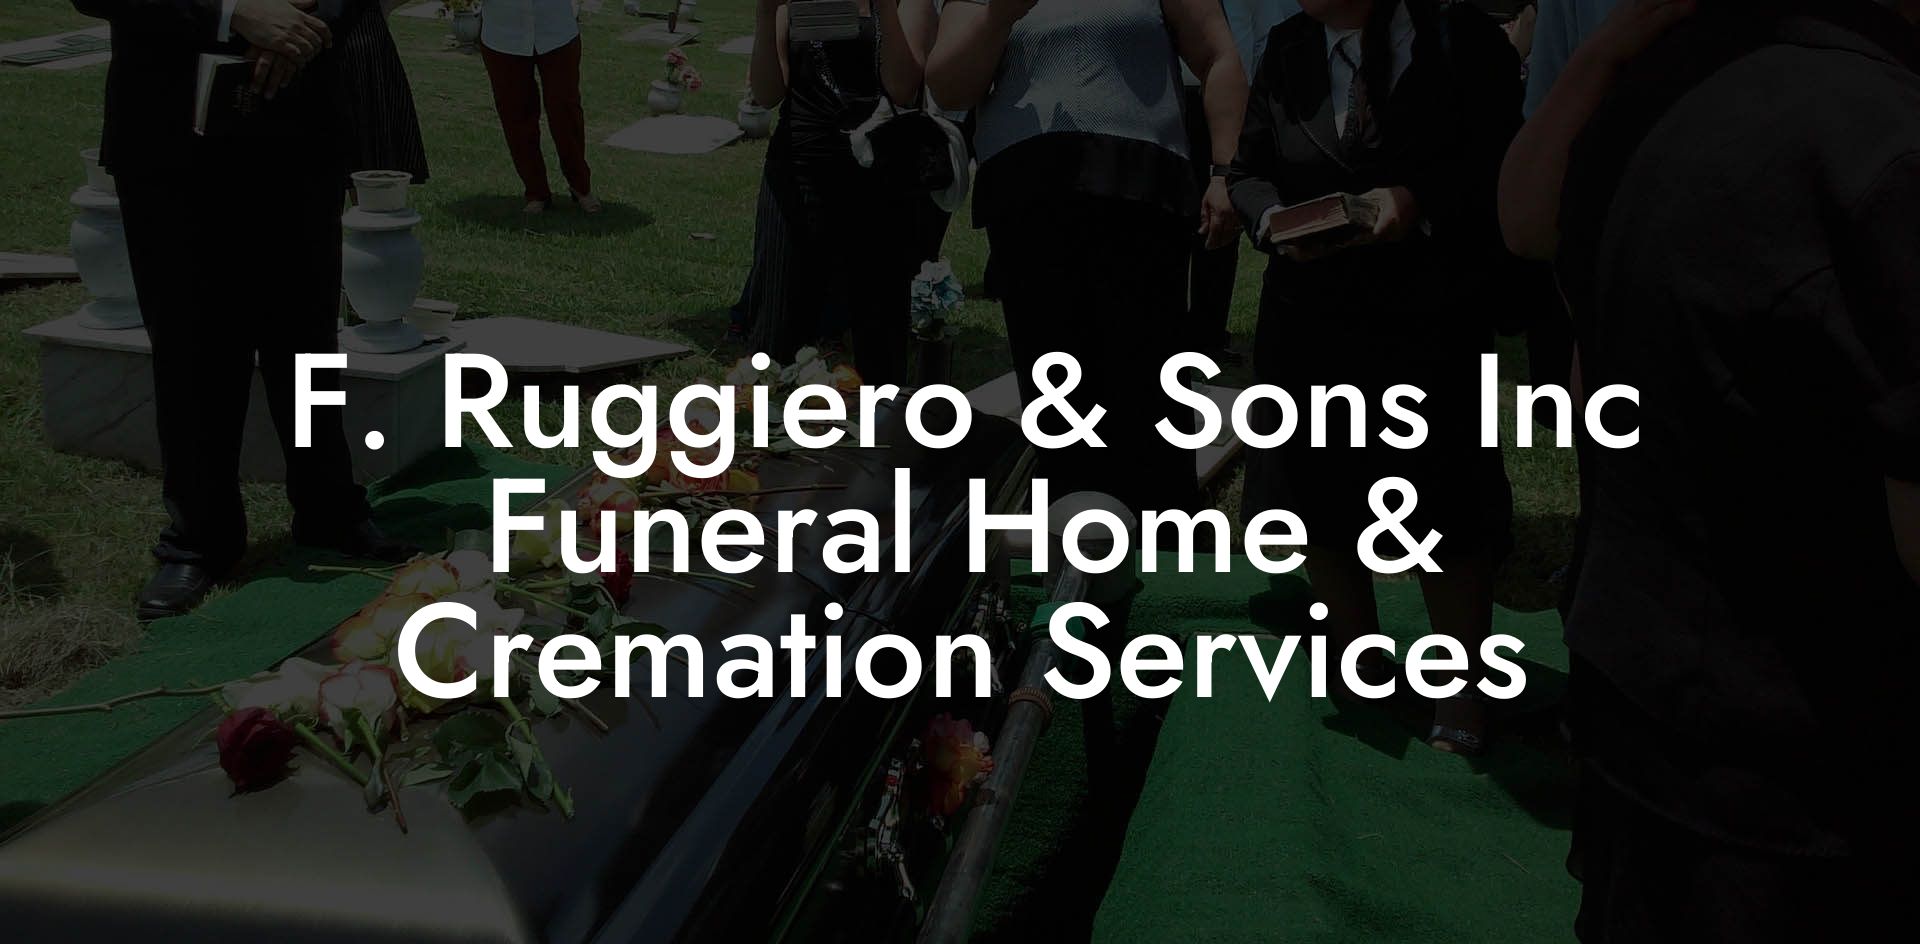 F. Ruggiero & Sons Inc Funeral Home & Cremation Services